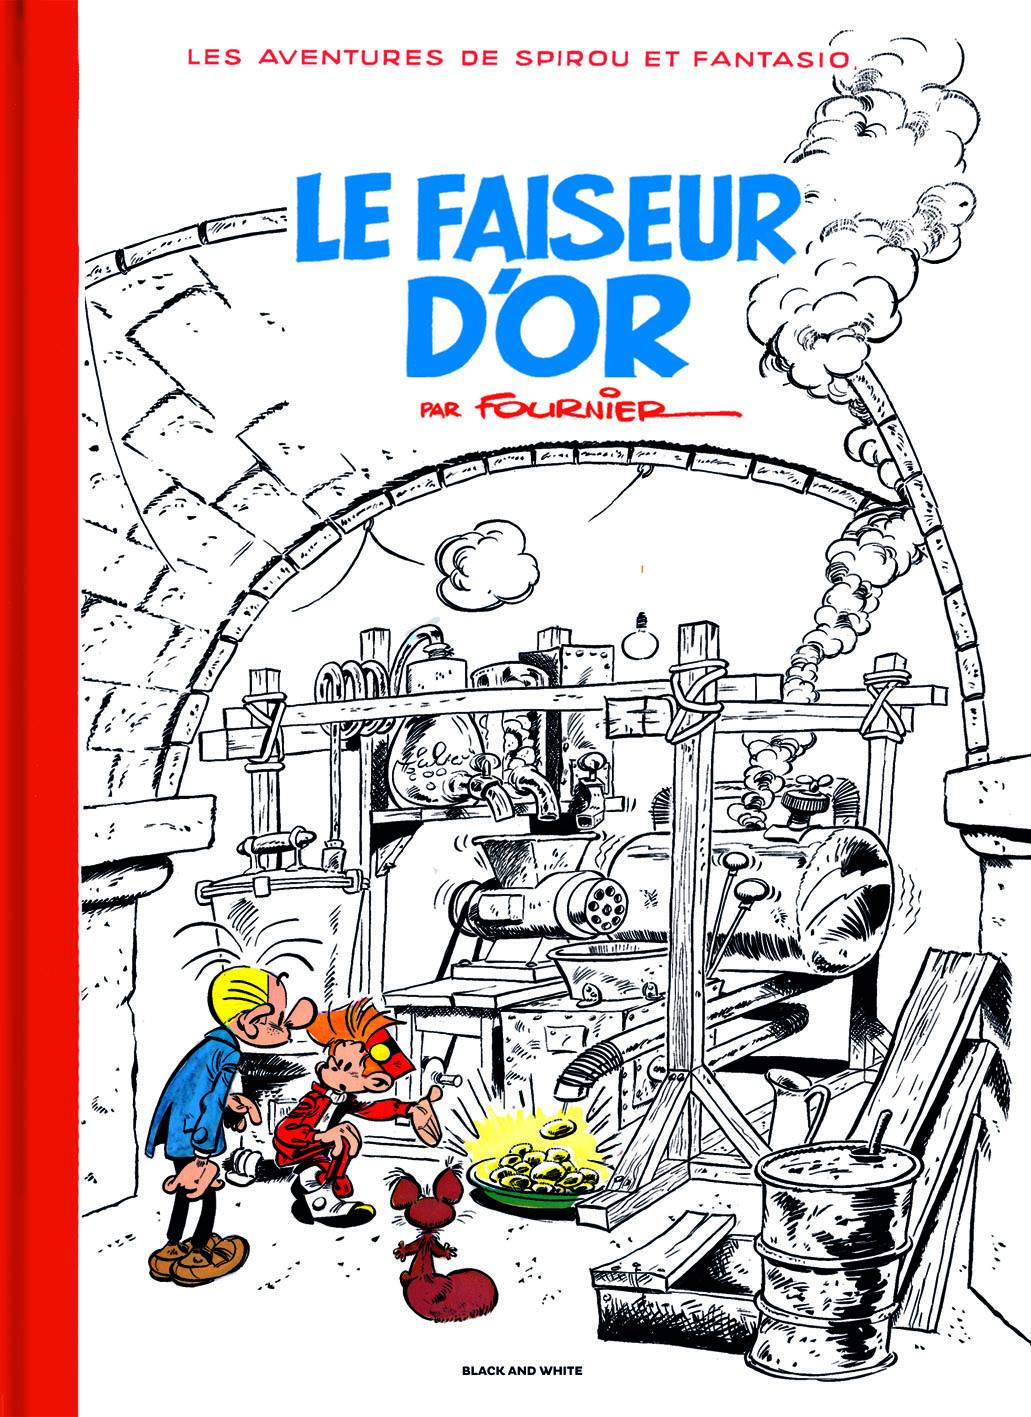 Spirou & Fantasio #20 'Le Faiseur d'or' VO cover ("The Gold Maker"; ill. Fournier; Copyright (c) Dupuis and the artist; image from facebook.com)